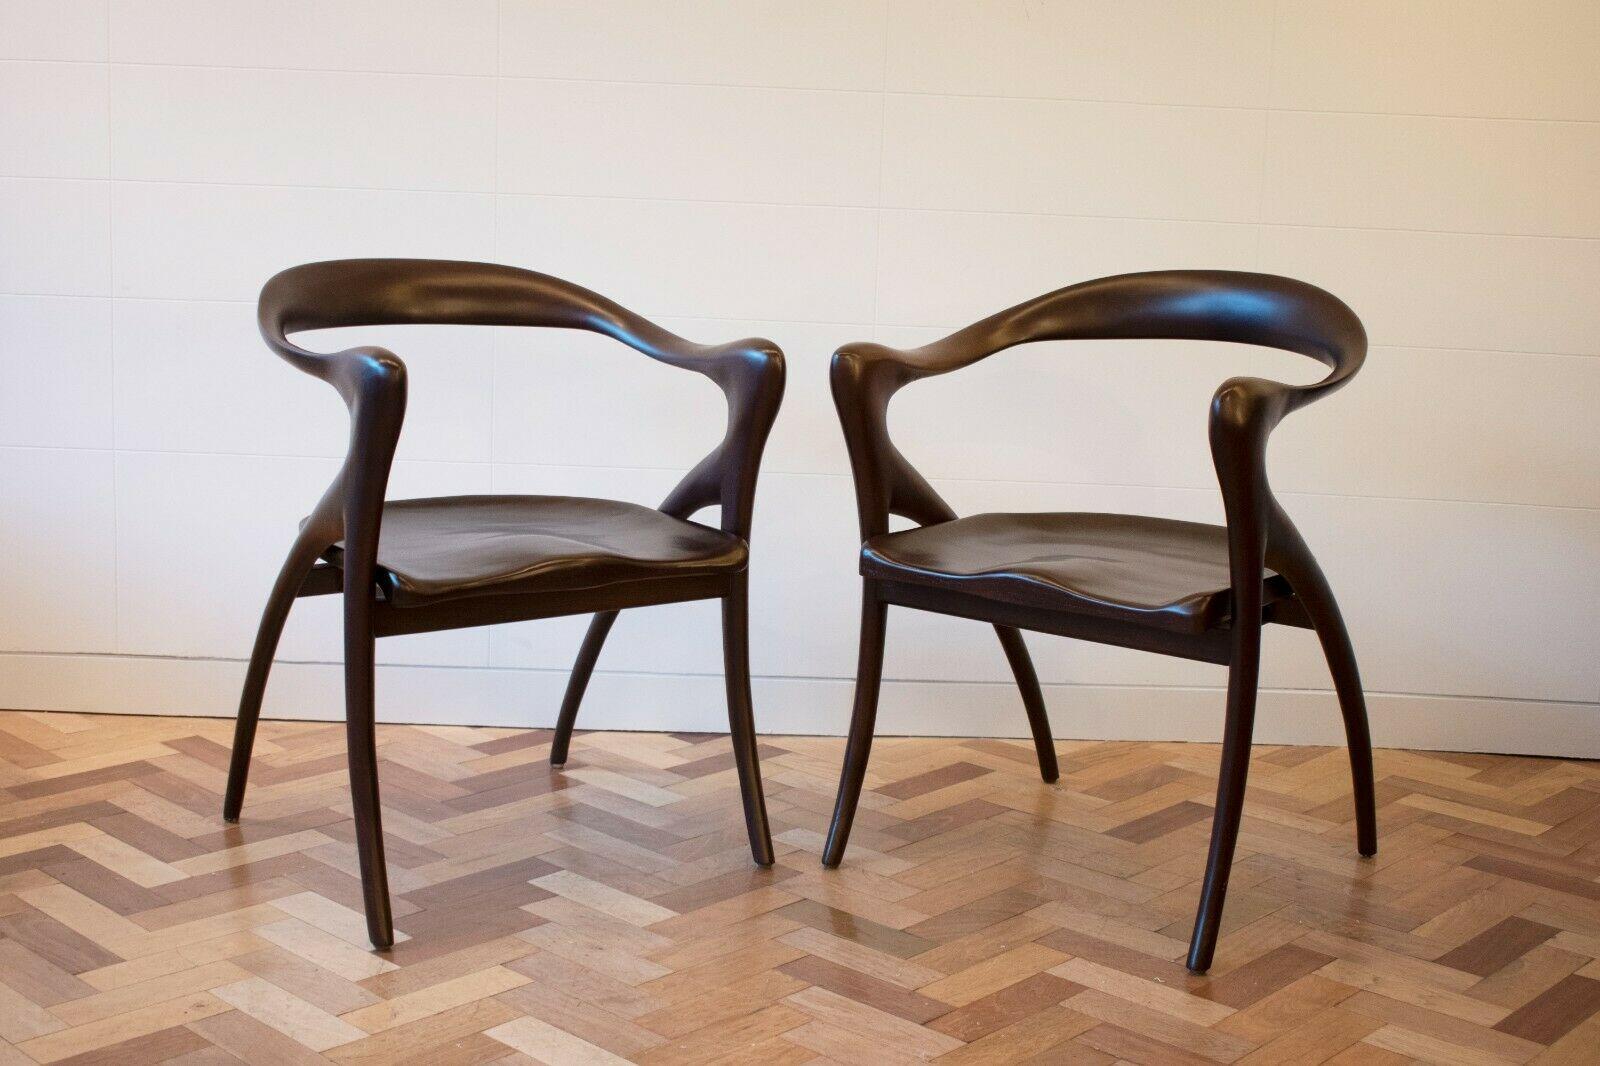 Pair of large mahogany armchairs Model Ode A La Femme by Olivier Schrijver

These Belgian armchairs feature sculptural, sinuous shaped mahogany armrests and back, with sculpted curved seats.

These chairs are surprisingly comfortable as they